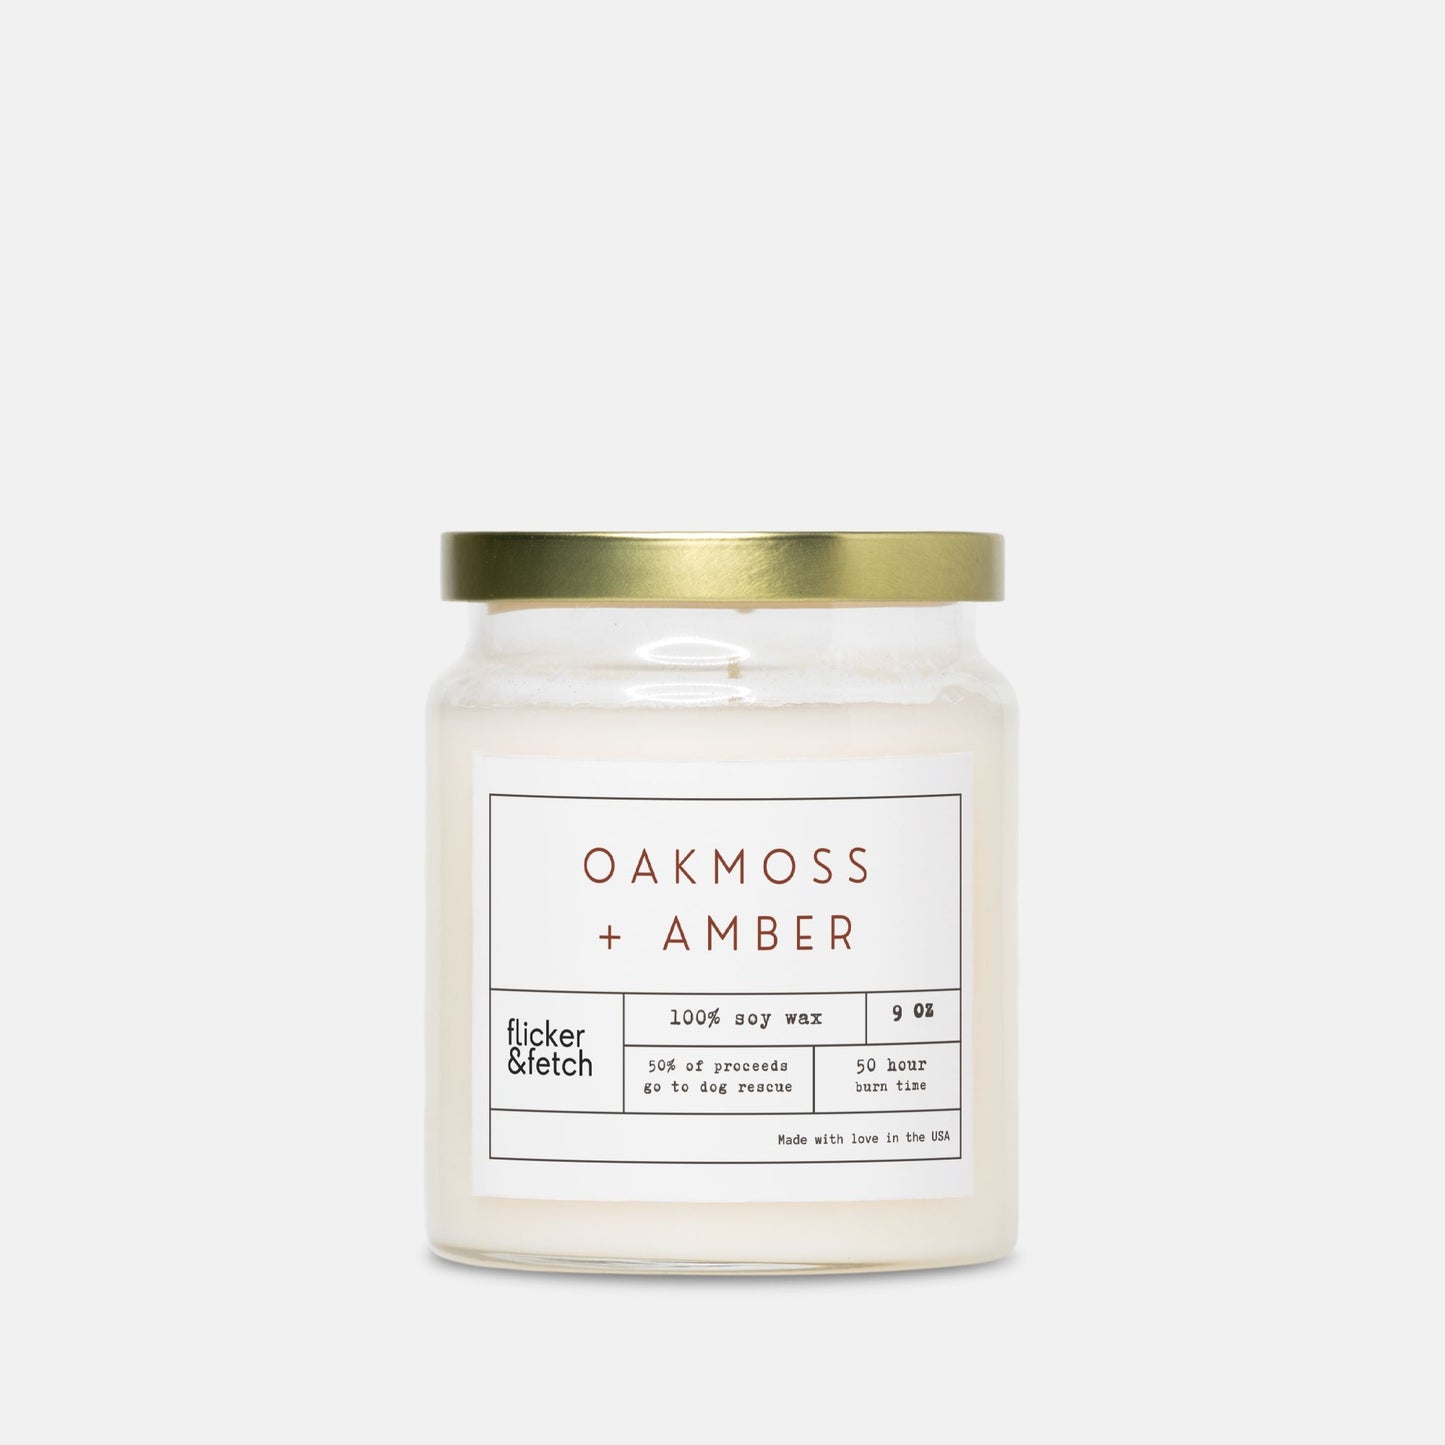 Oakmoss + Amber Soy Candle in Apothecary Jar 9oz